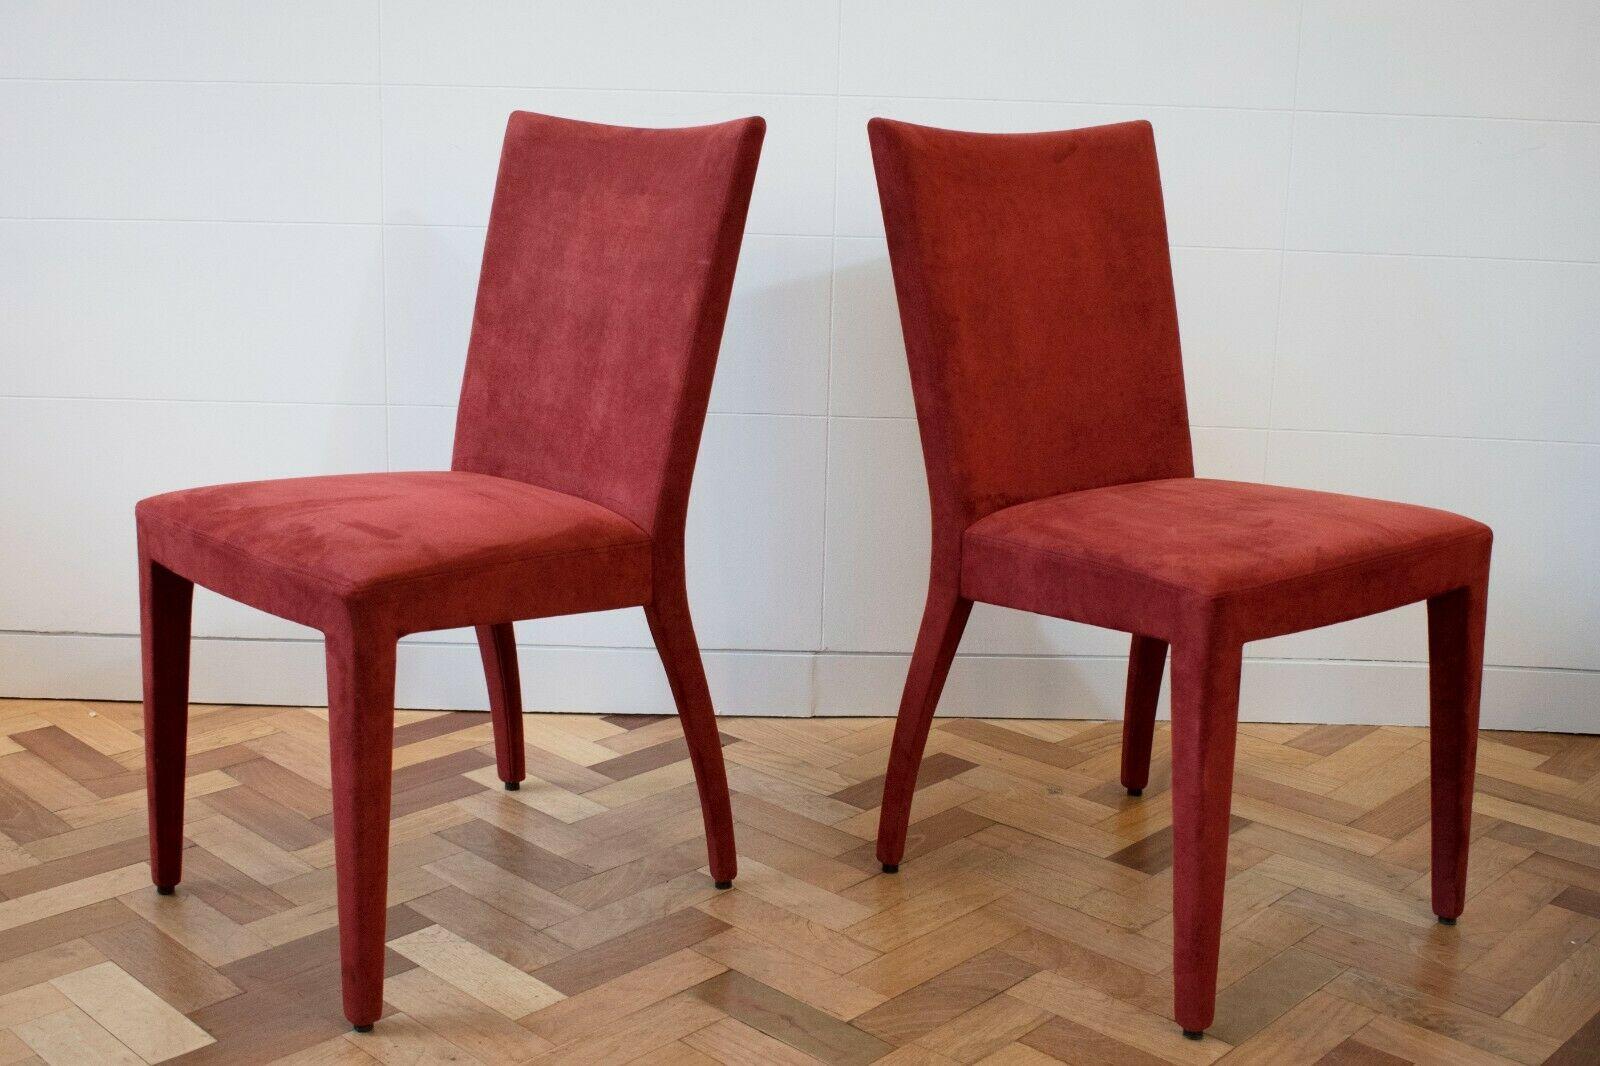 Contemporary Set of 6 Roche Bobois Red Suede Dining Chairs